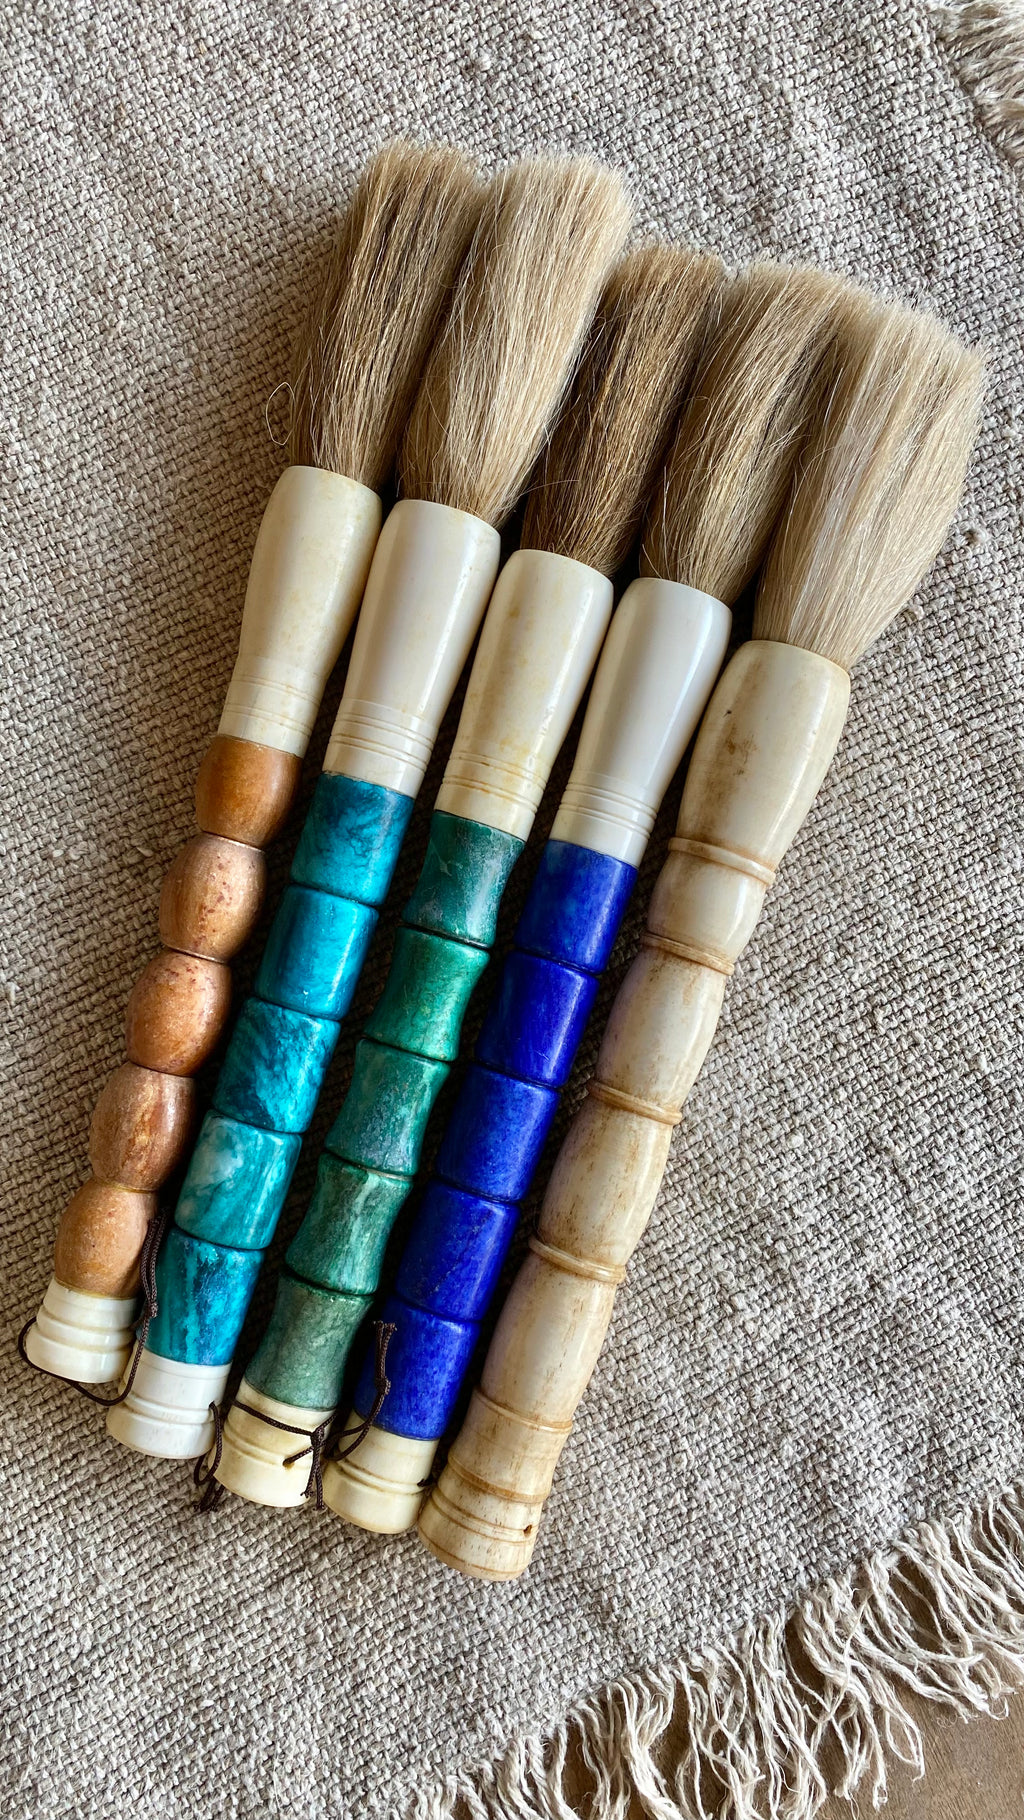 Caligraphy brushes - 33cm